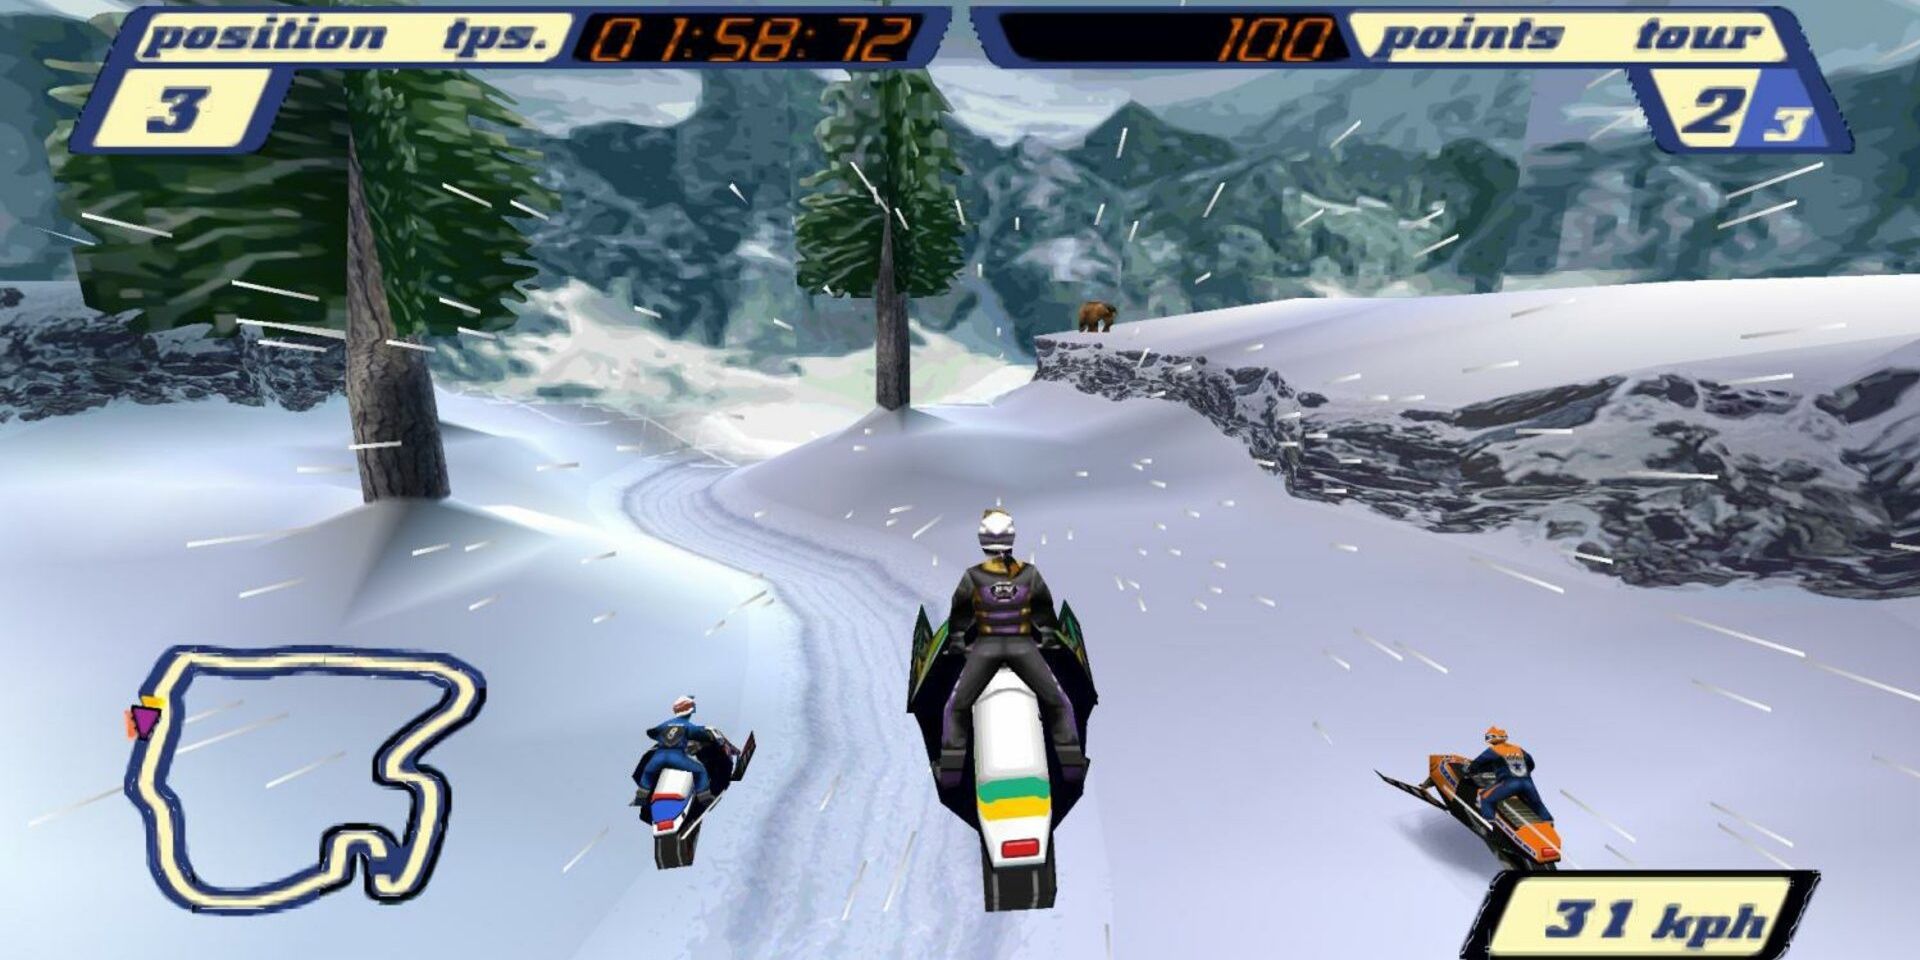 A racer in 3rd place in Sled Storm on PS2. They are between two other racers and a speedometer indicates they're traveling 31 kph.